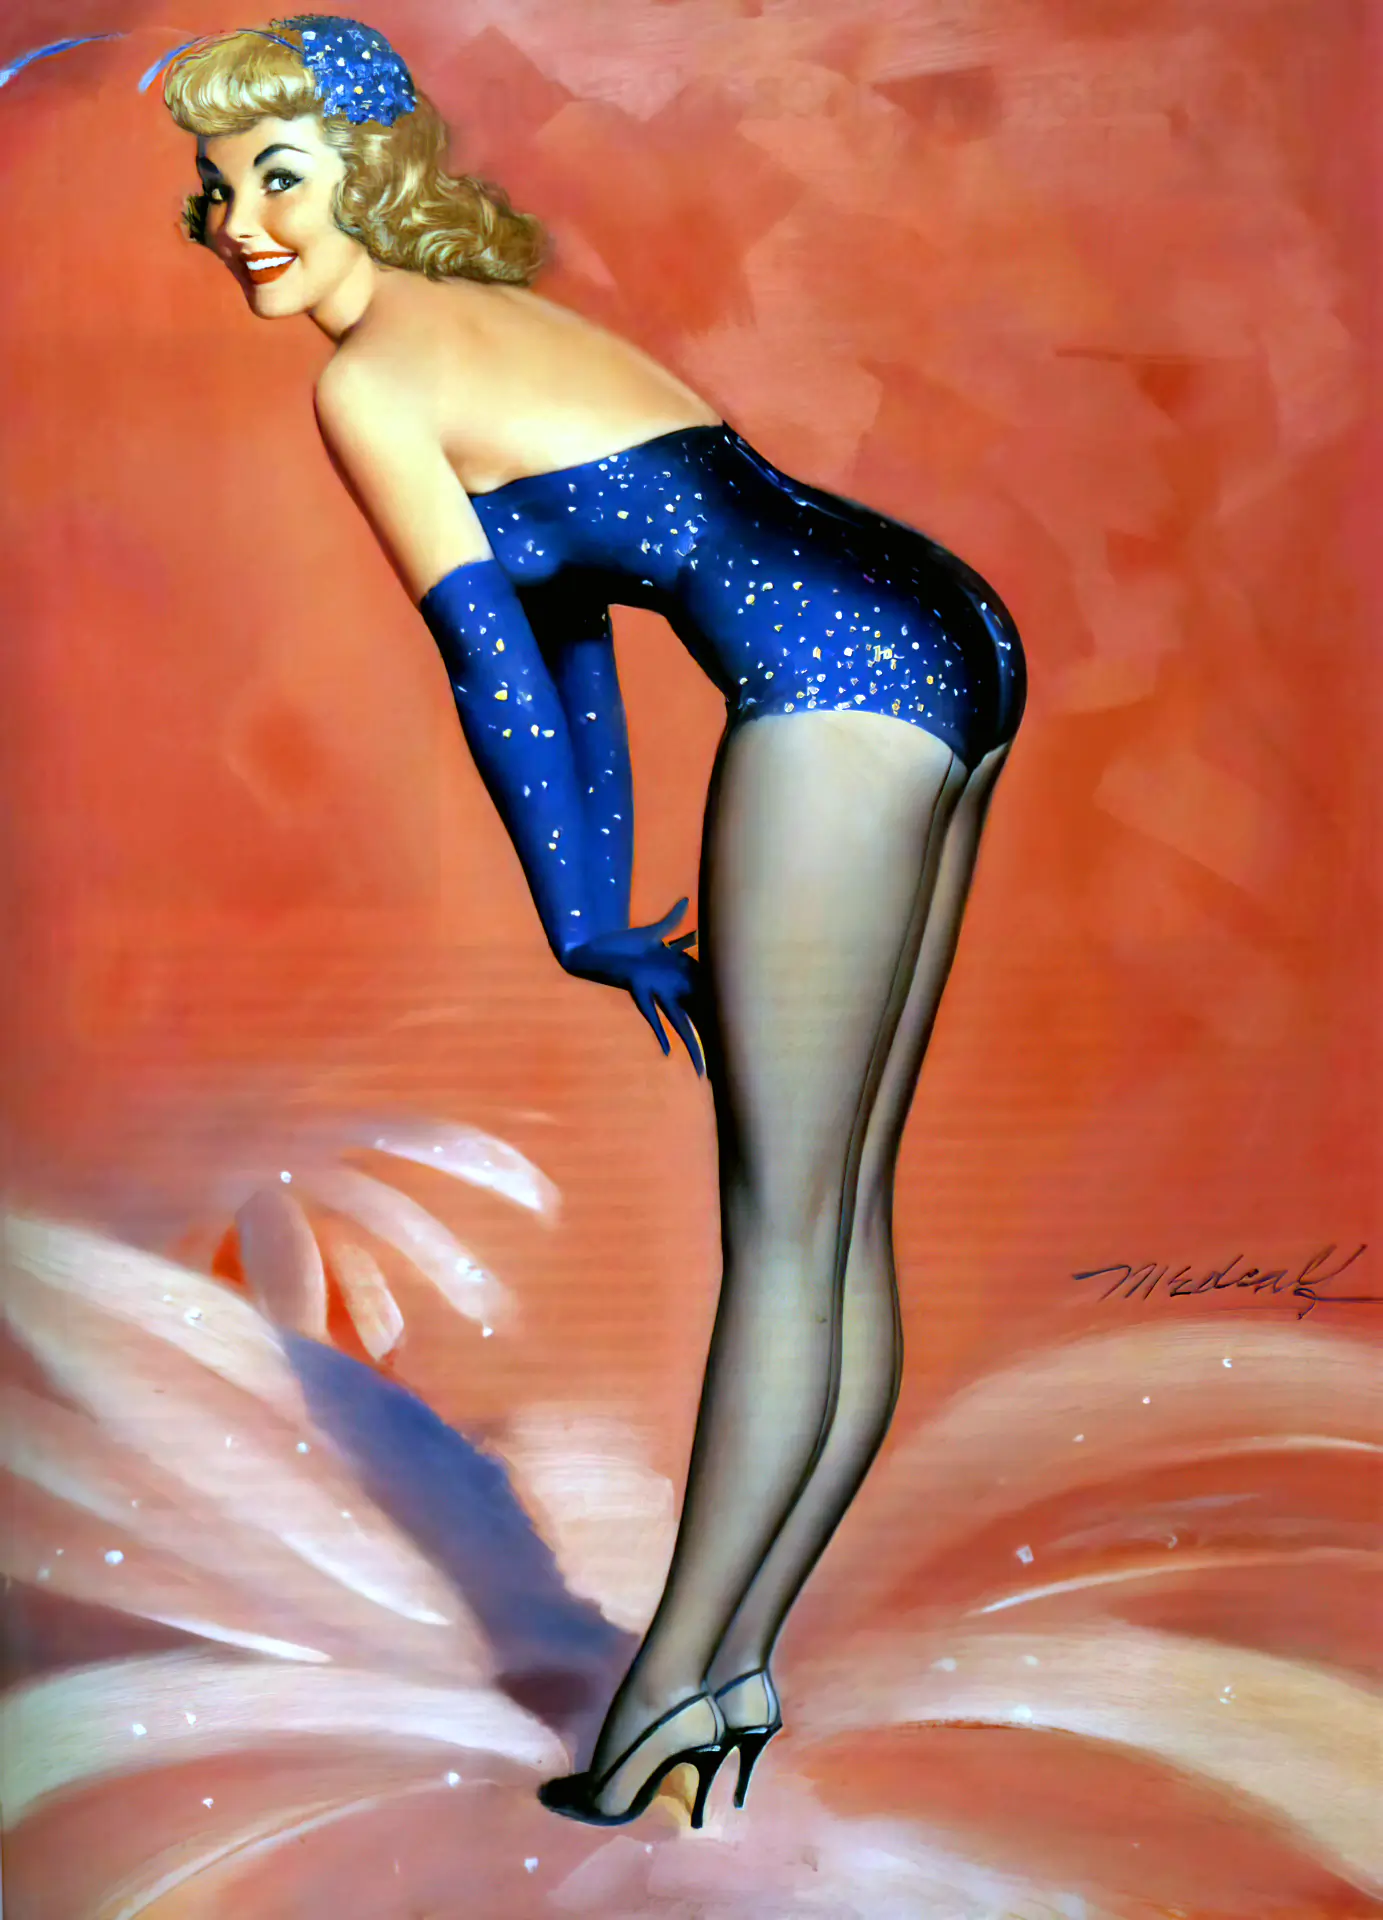 Sweet pinup classic lady with a firm ass in a tight blue costume